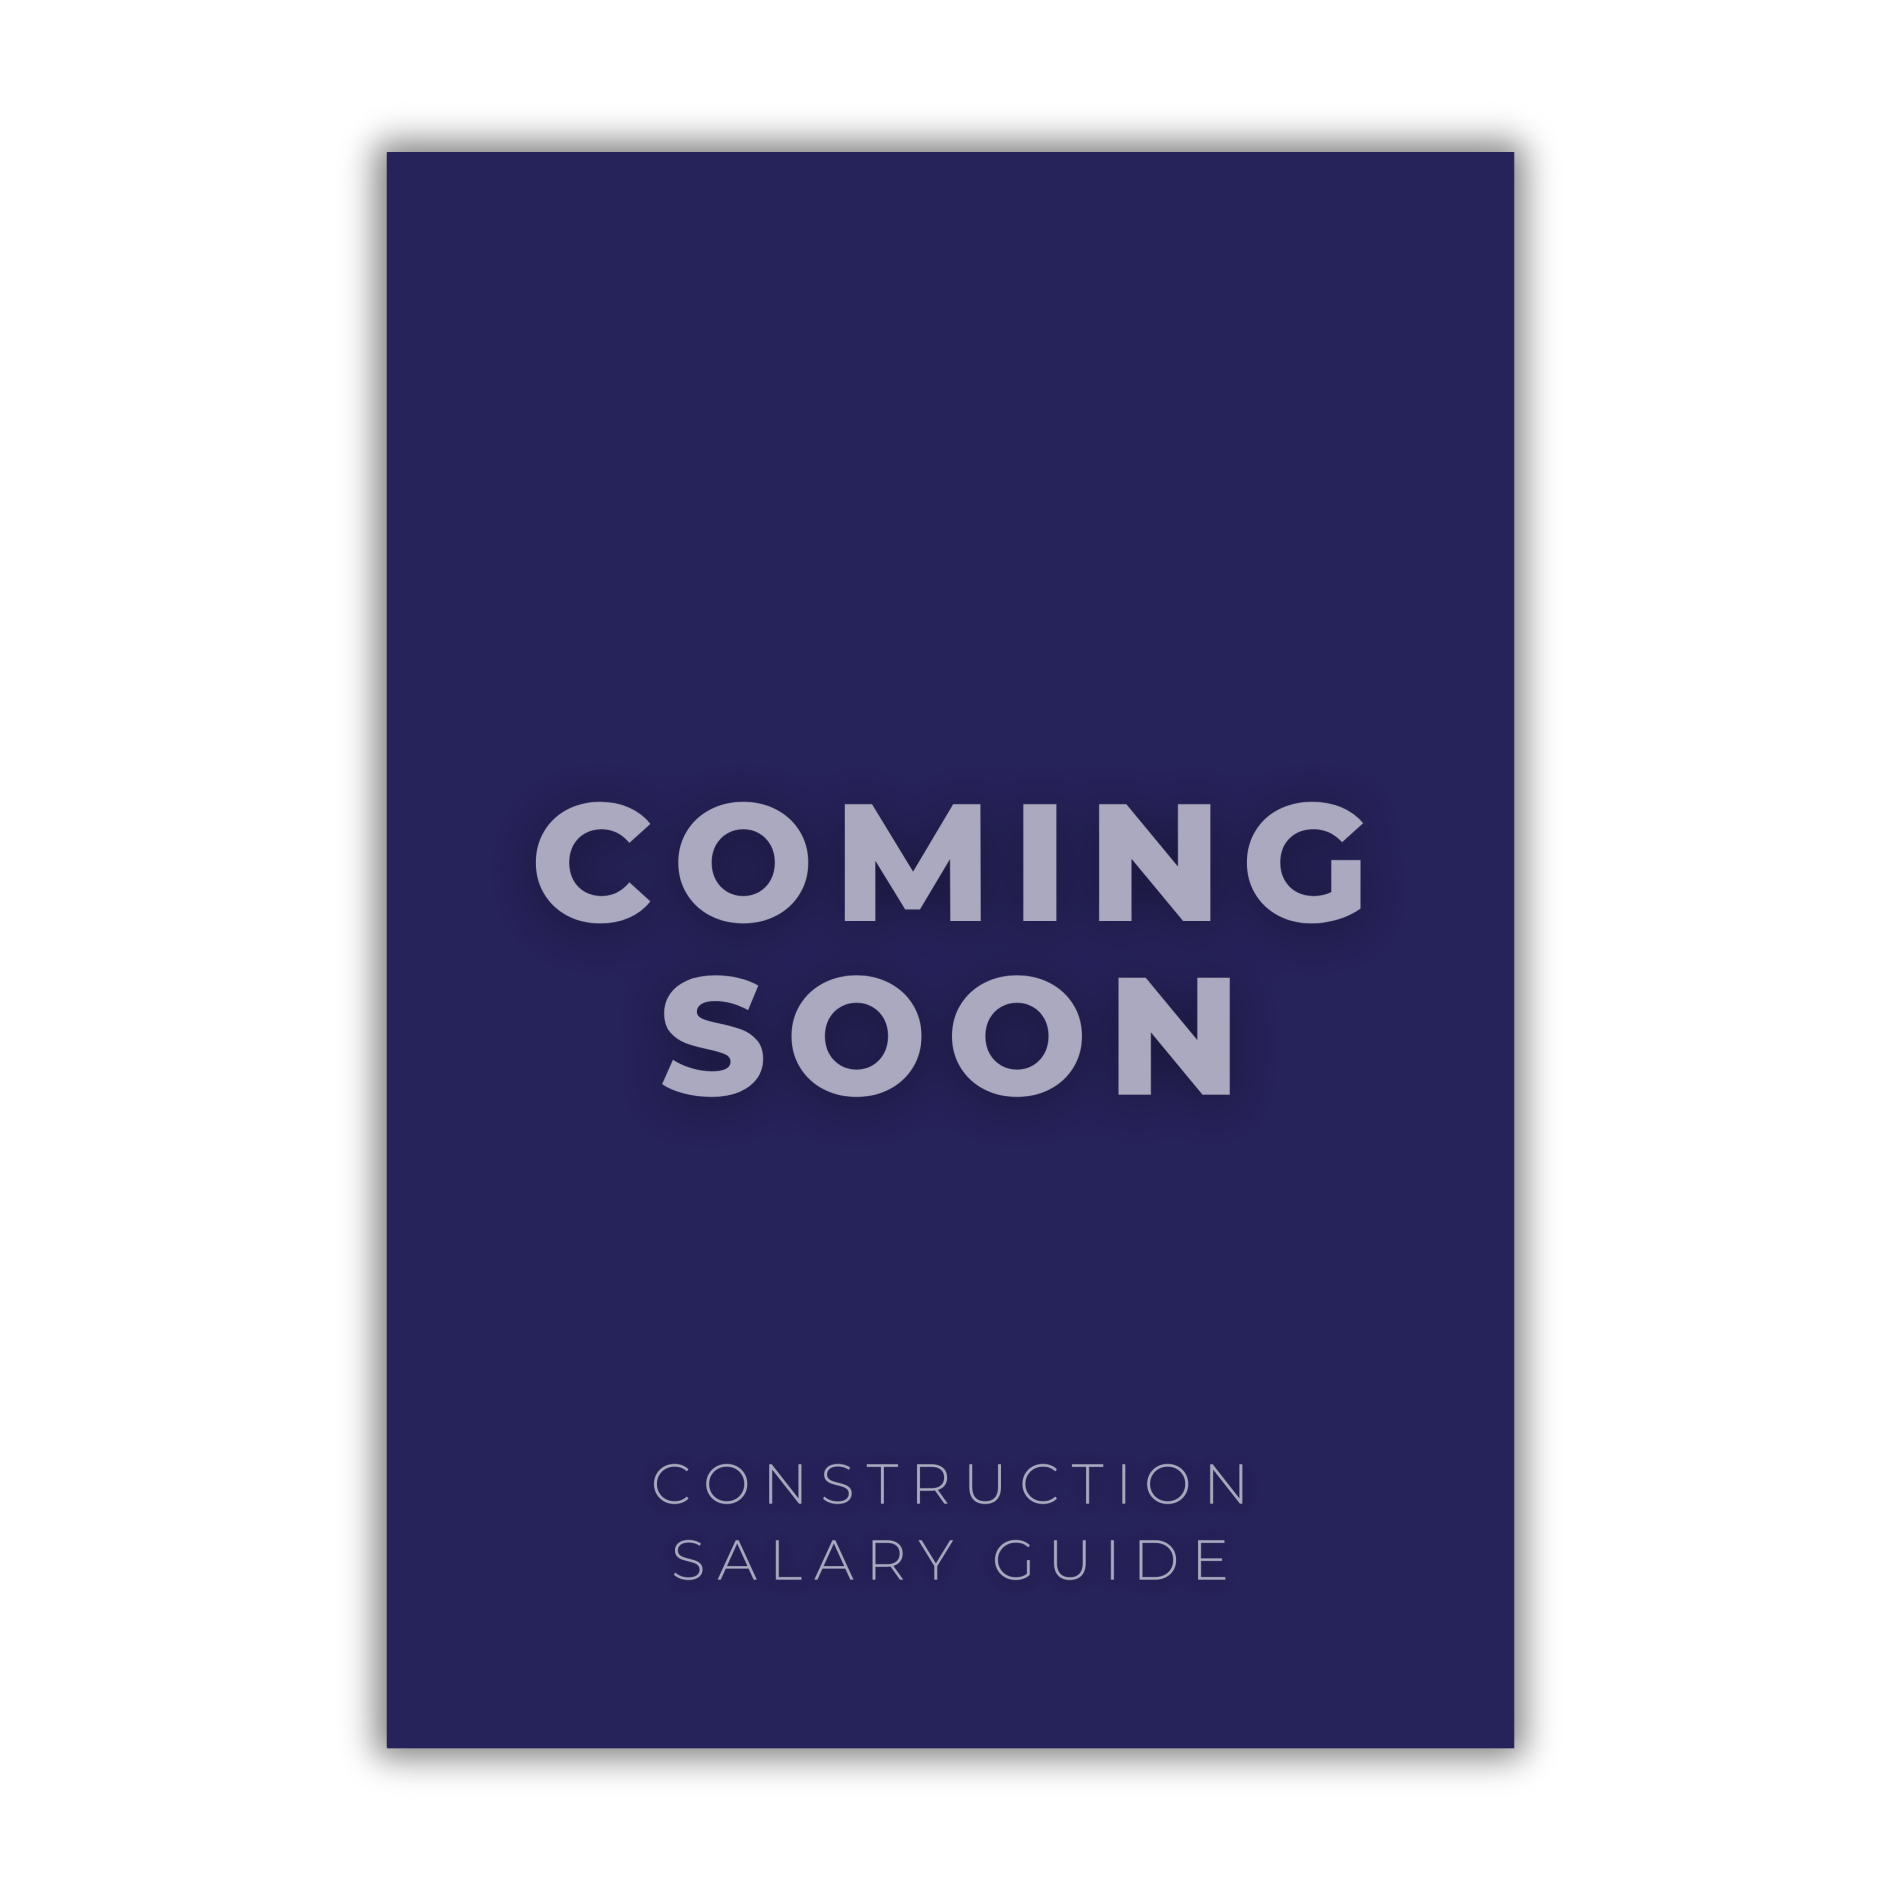 Construction Salary Guide - Coming Soon